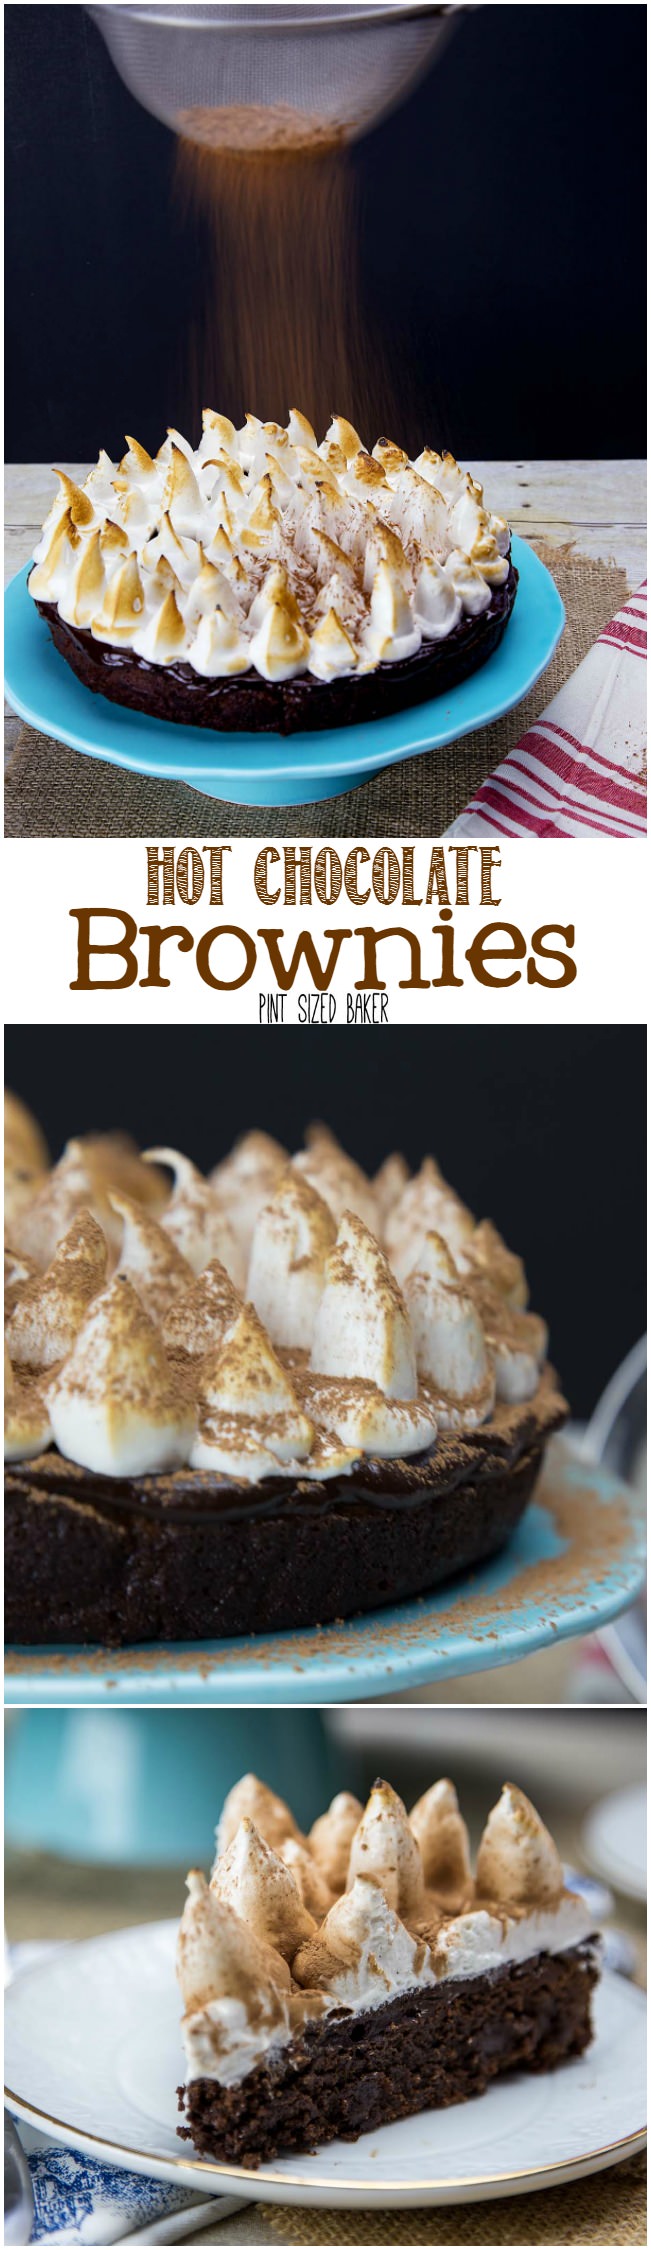 My family love it when I make these Hot Chocolate Brownies. It's so easy and so tasty! It's always a hit in my home!